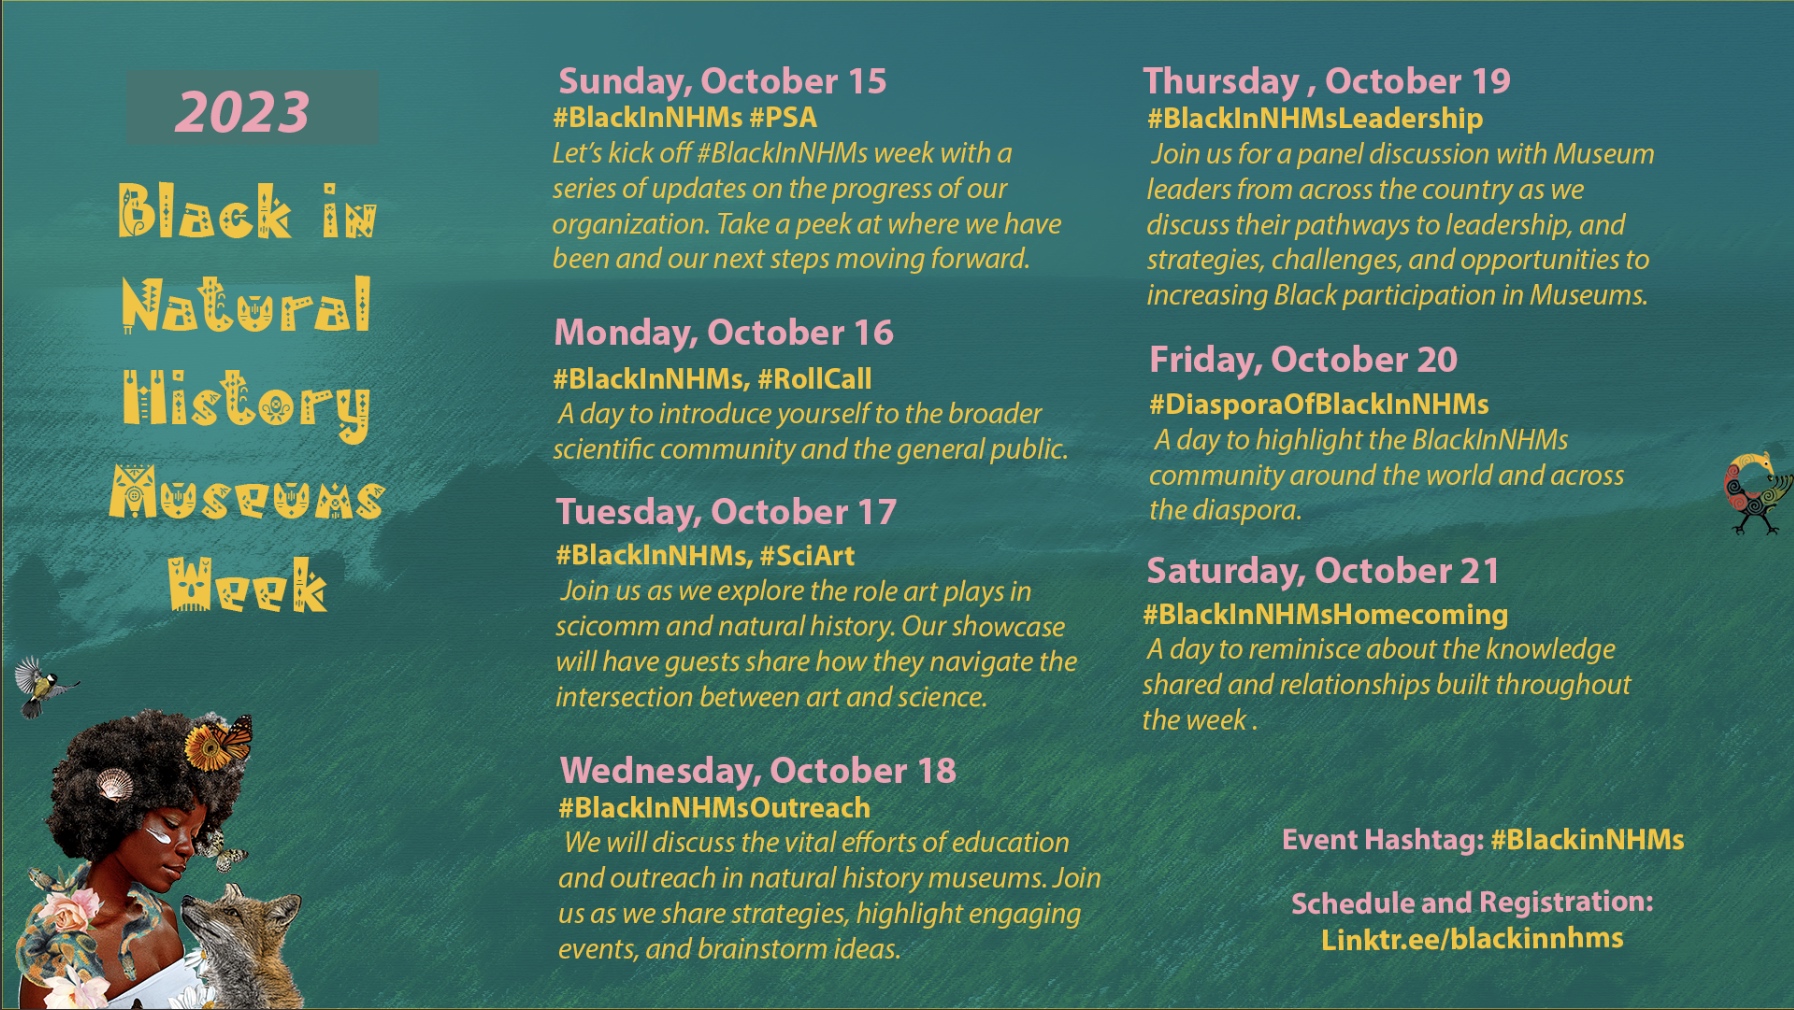 Flyer listing the activities to take place during the 2023 Black in Natural History week